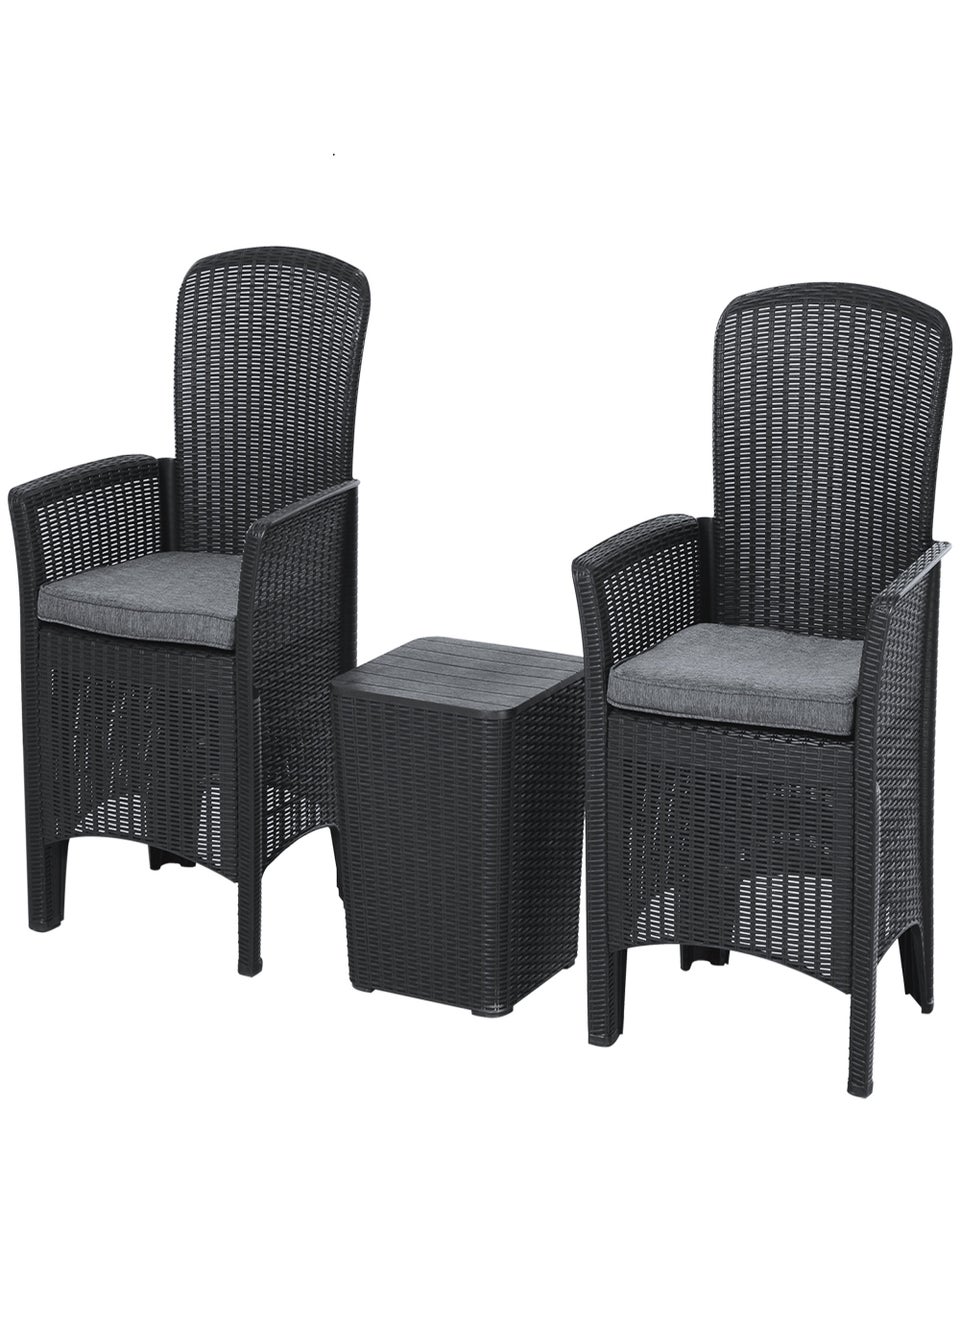 Outsunny 3 Piece Faux Rattan Table & Chairs Set